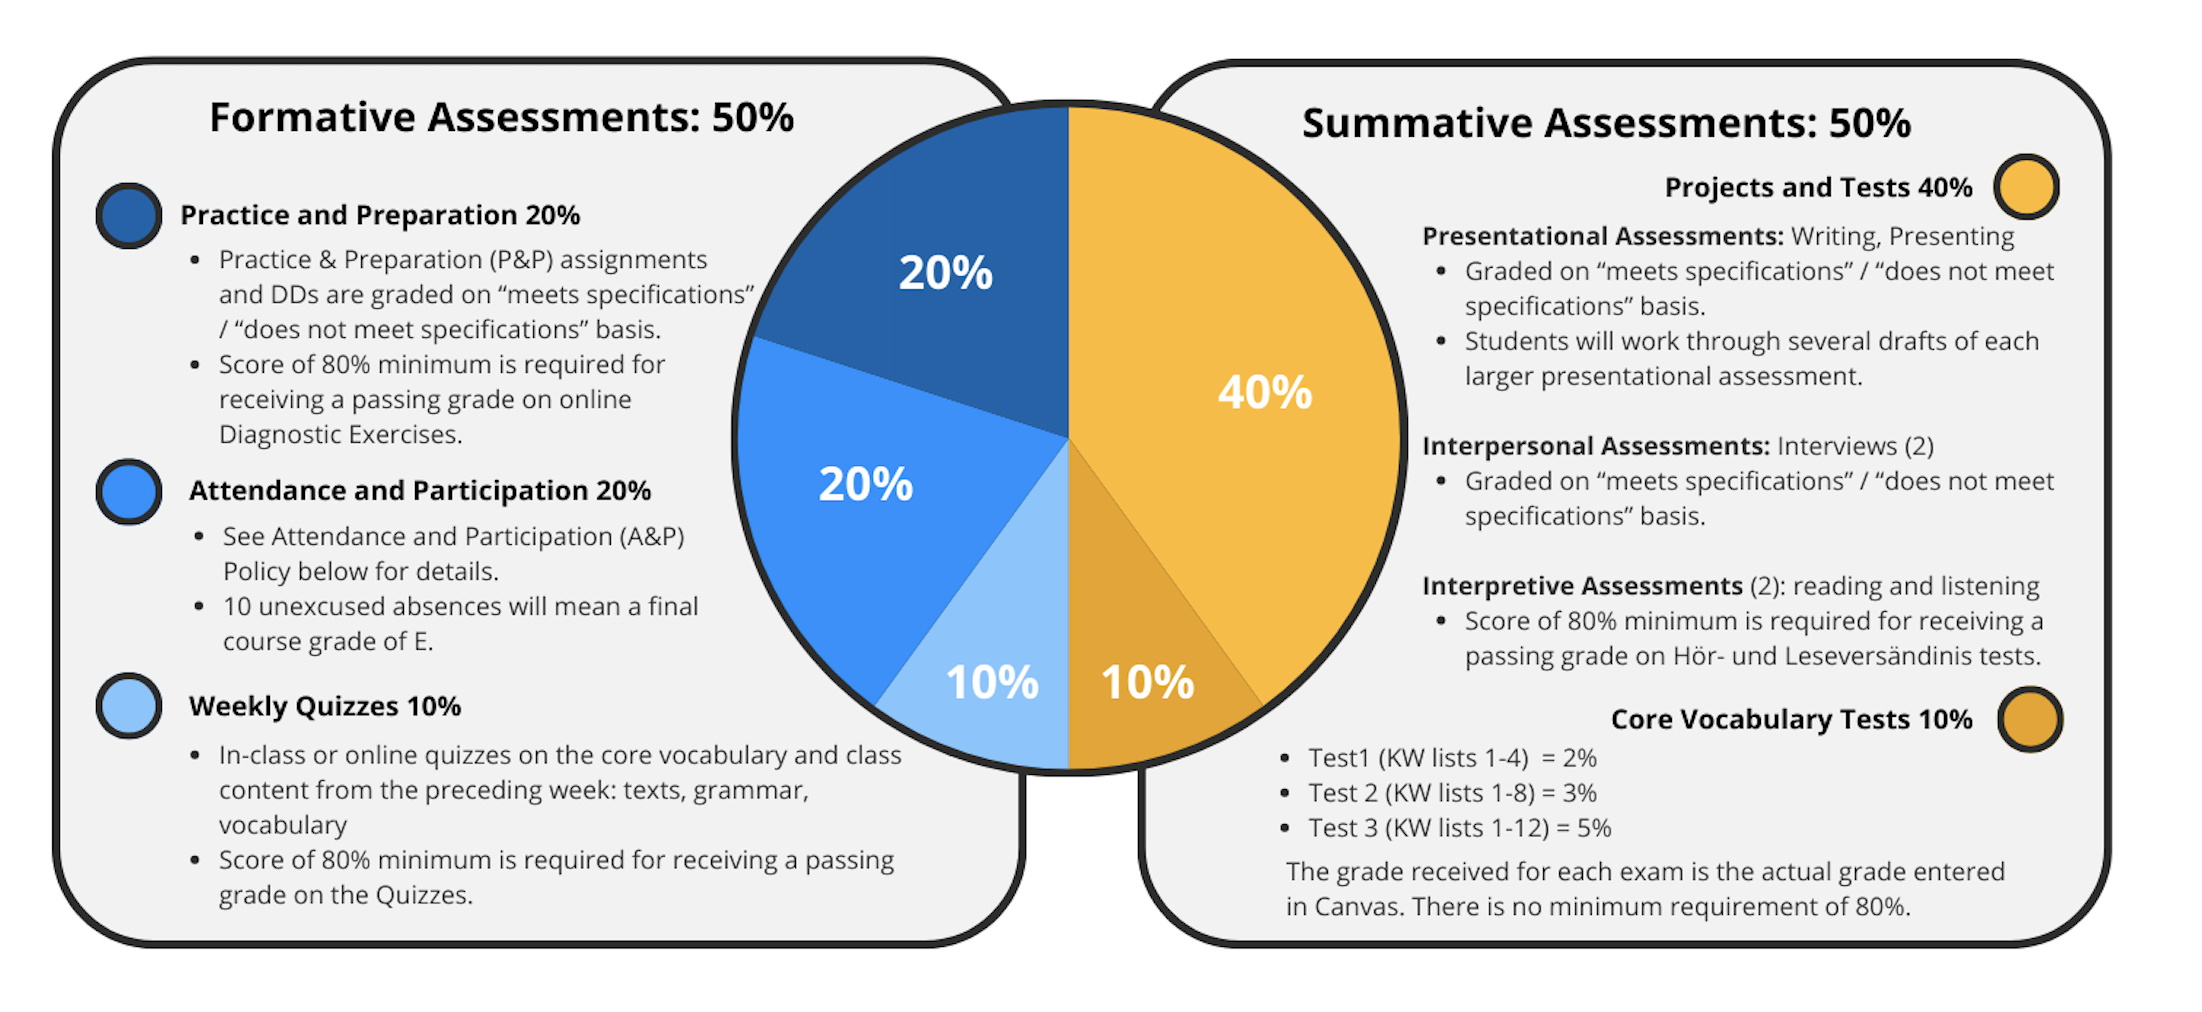 Formative Assessments: 50% (Attendance and Participation 20%, Practice and Preparation 20%, Quizzes 10%), Summative Assessments 50% (Projects and tests 40% and Core Vocabulary Tests 10%)